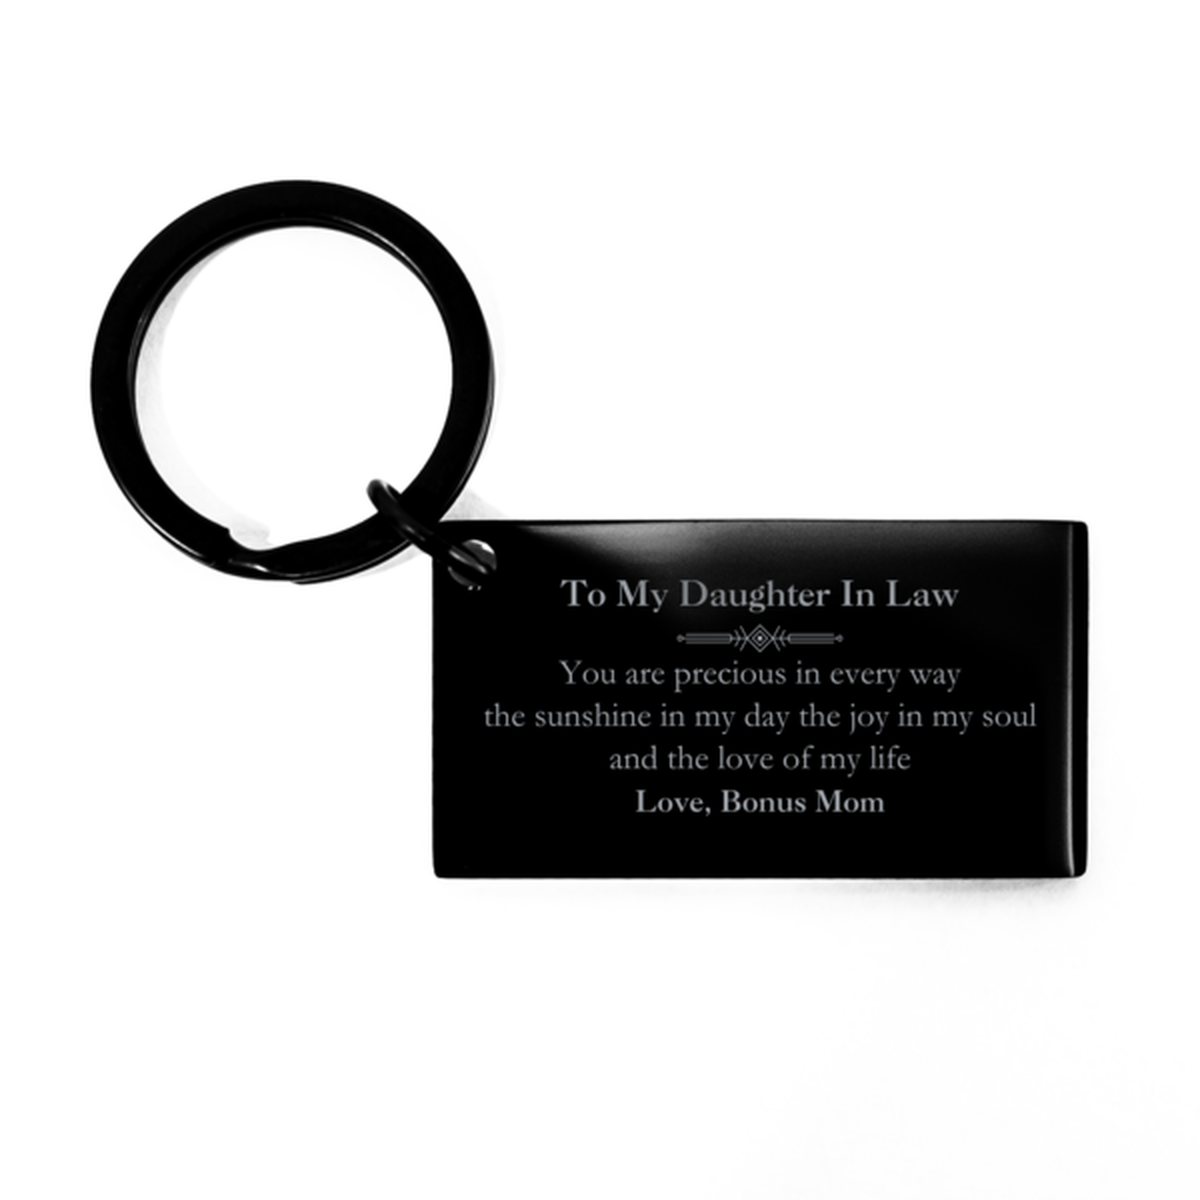 Graduation Gifts for Daughter In Law Keychain Present from Bonus Mom, Christmas Daughter In Law Birthday Gifts Daughter In Law You are precious in every way the sunshine in my day. Love, Bonus Mom